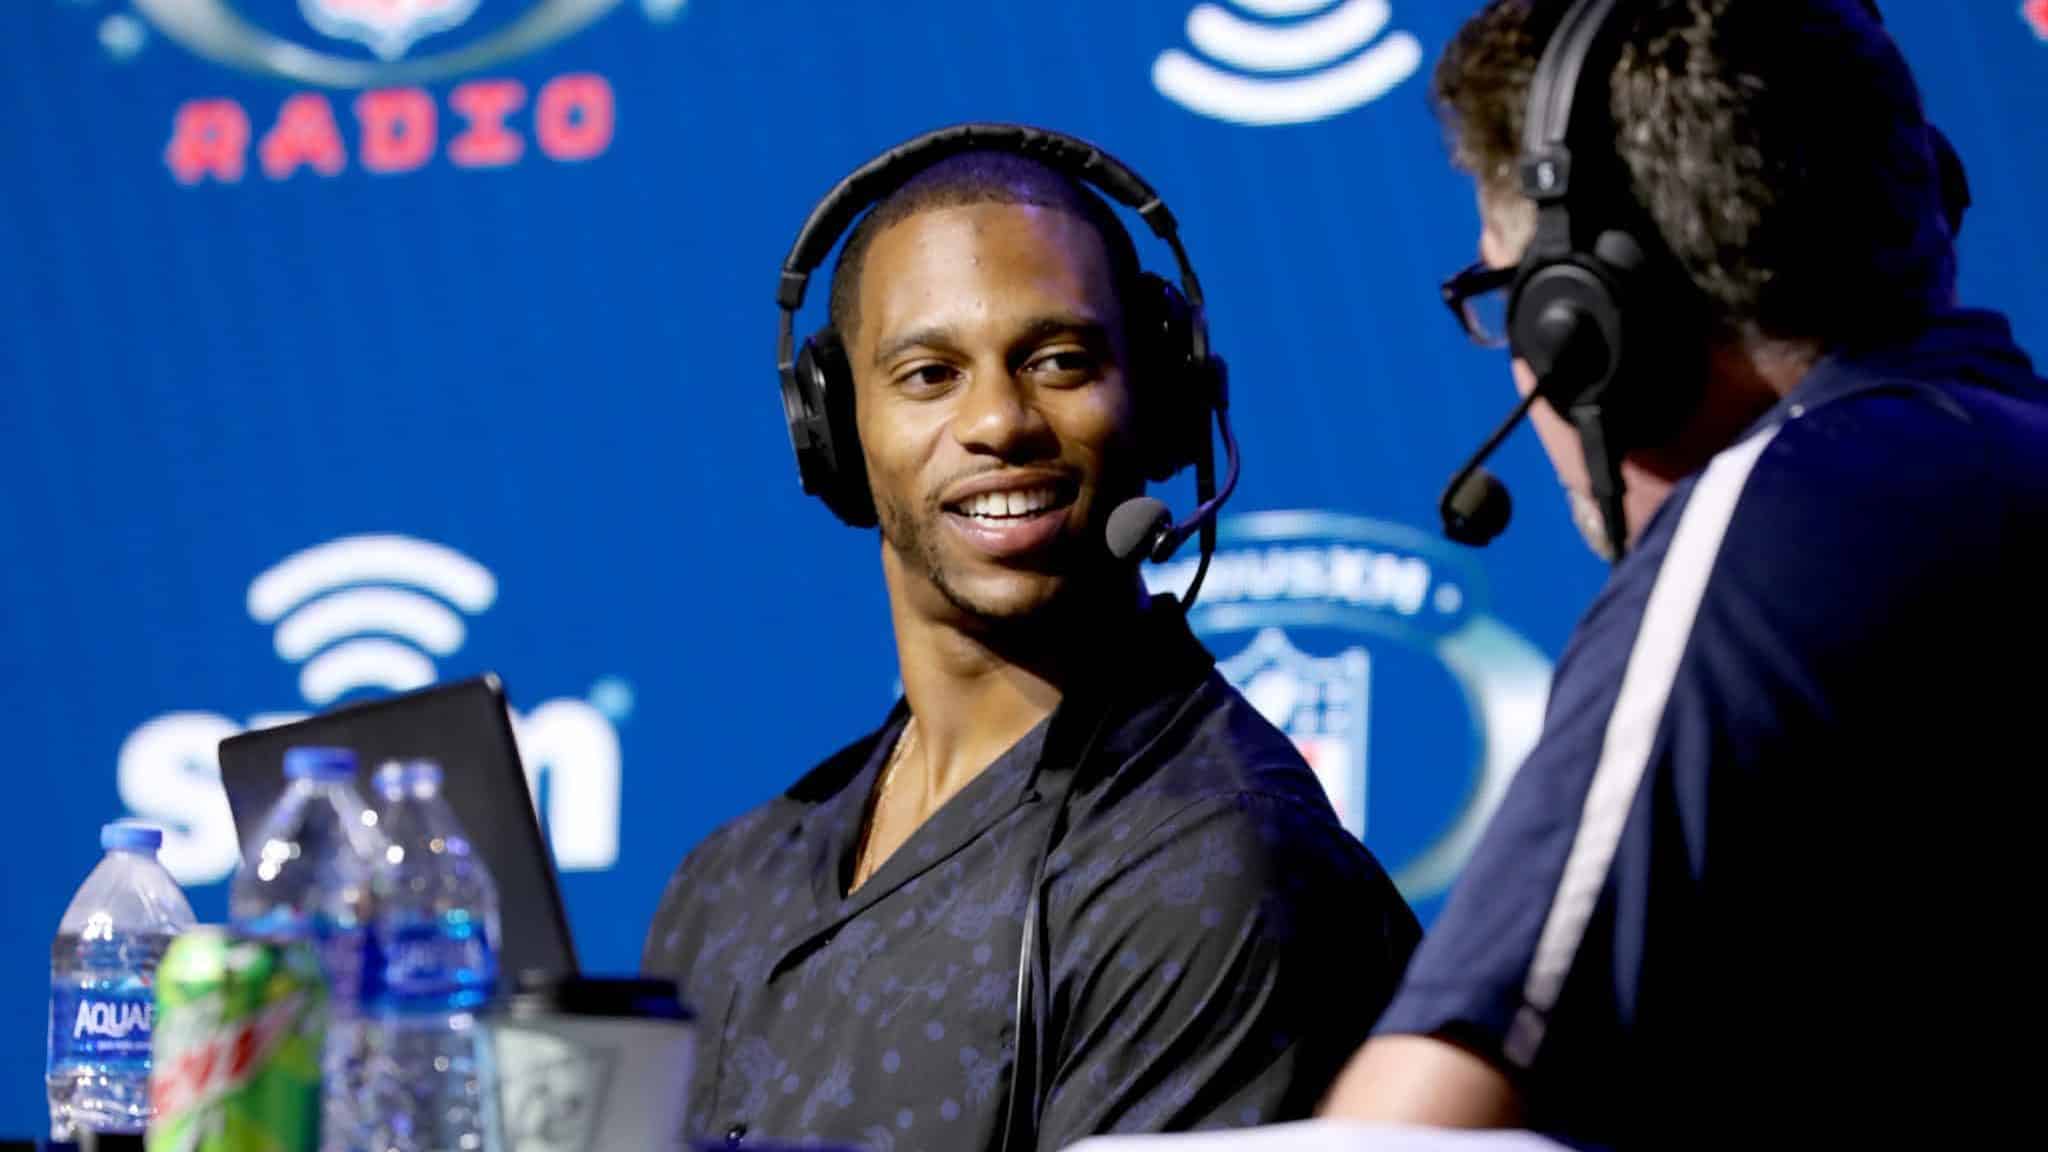 MIAMI, FLORIDA - JANUARY 29: Former NFL player Victor Cruz and SiriusXM host Jim Miller speak onstage during day 1 with SiriusXM at Super Bowl LIV on January 29, 2020 in Miami, Florida.